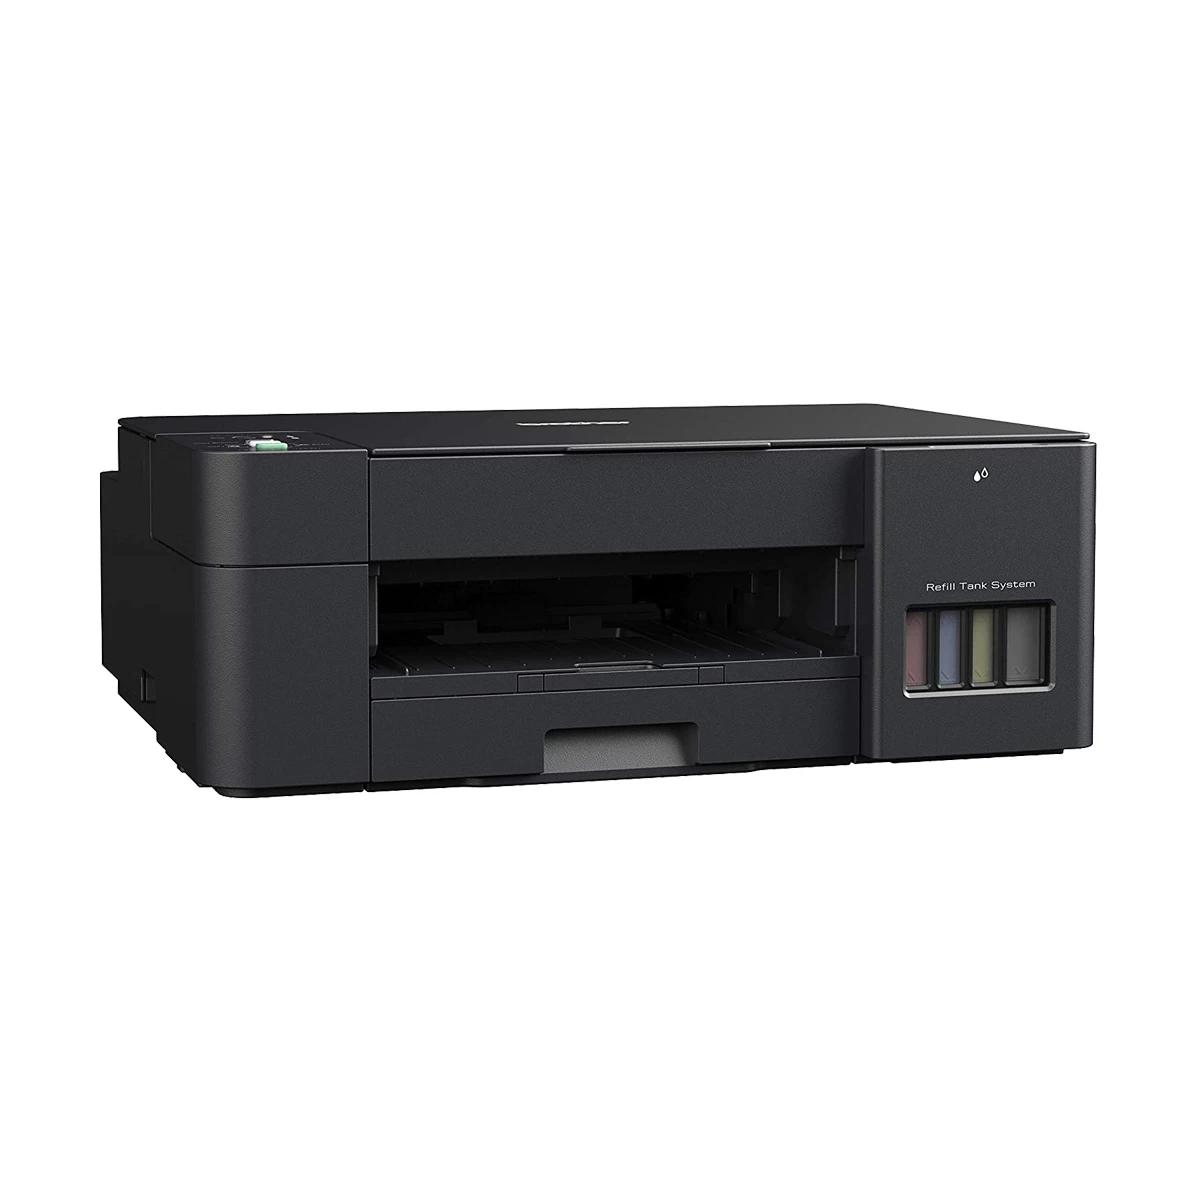 Brother DCP-T220 Multifunction Color Ink Printer